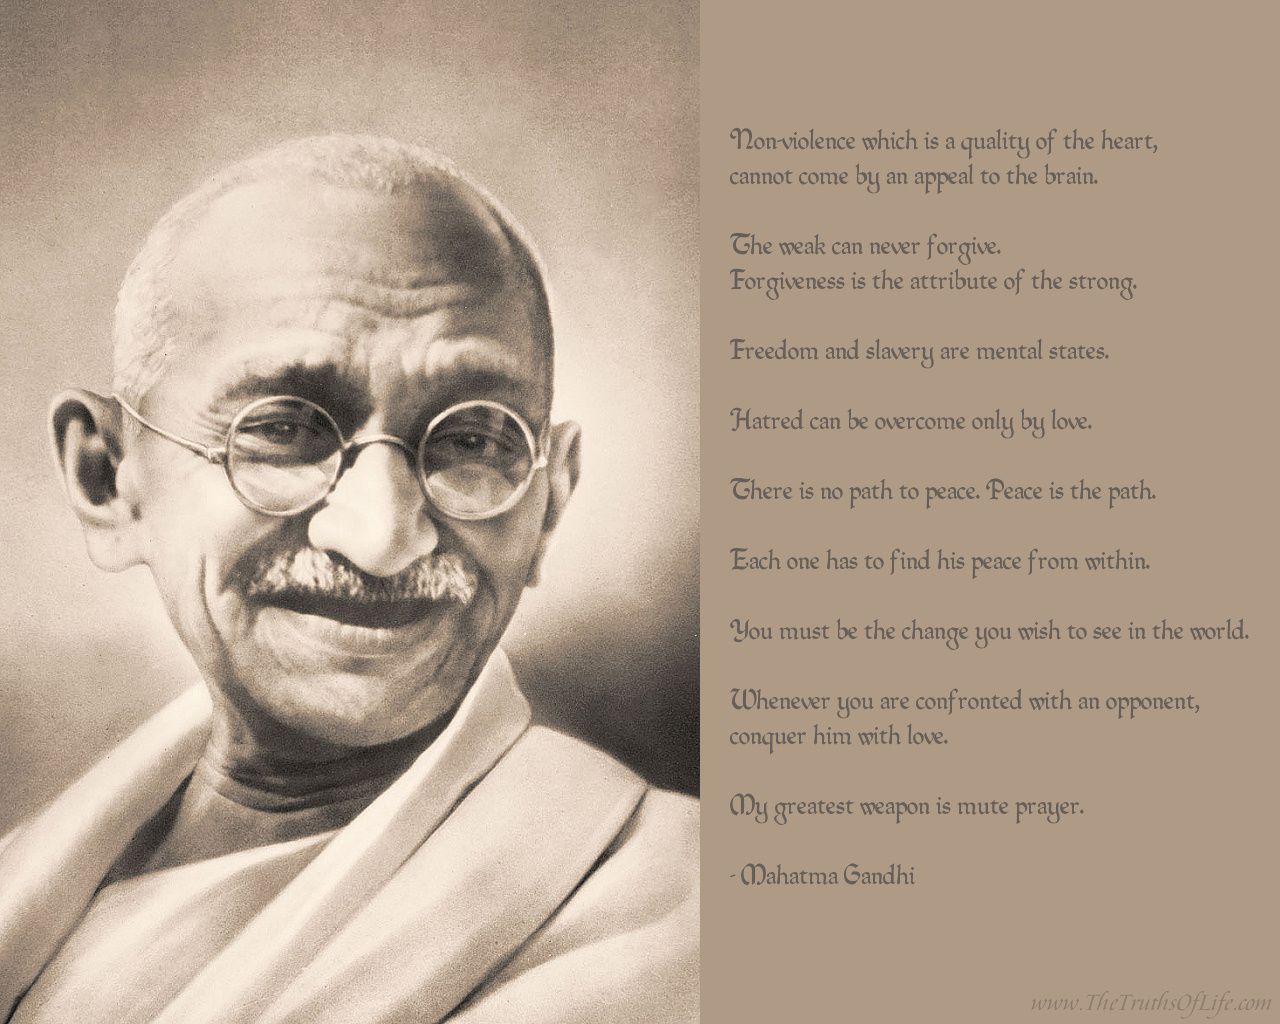 Bapu's relevance in the 21st century